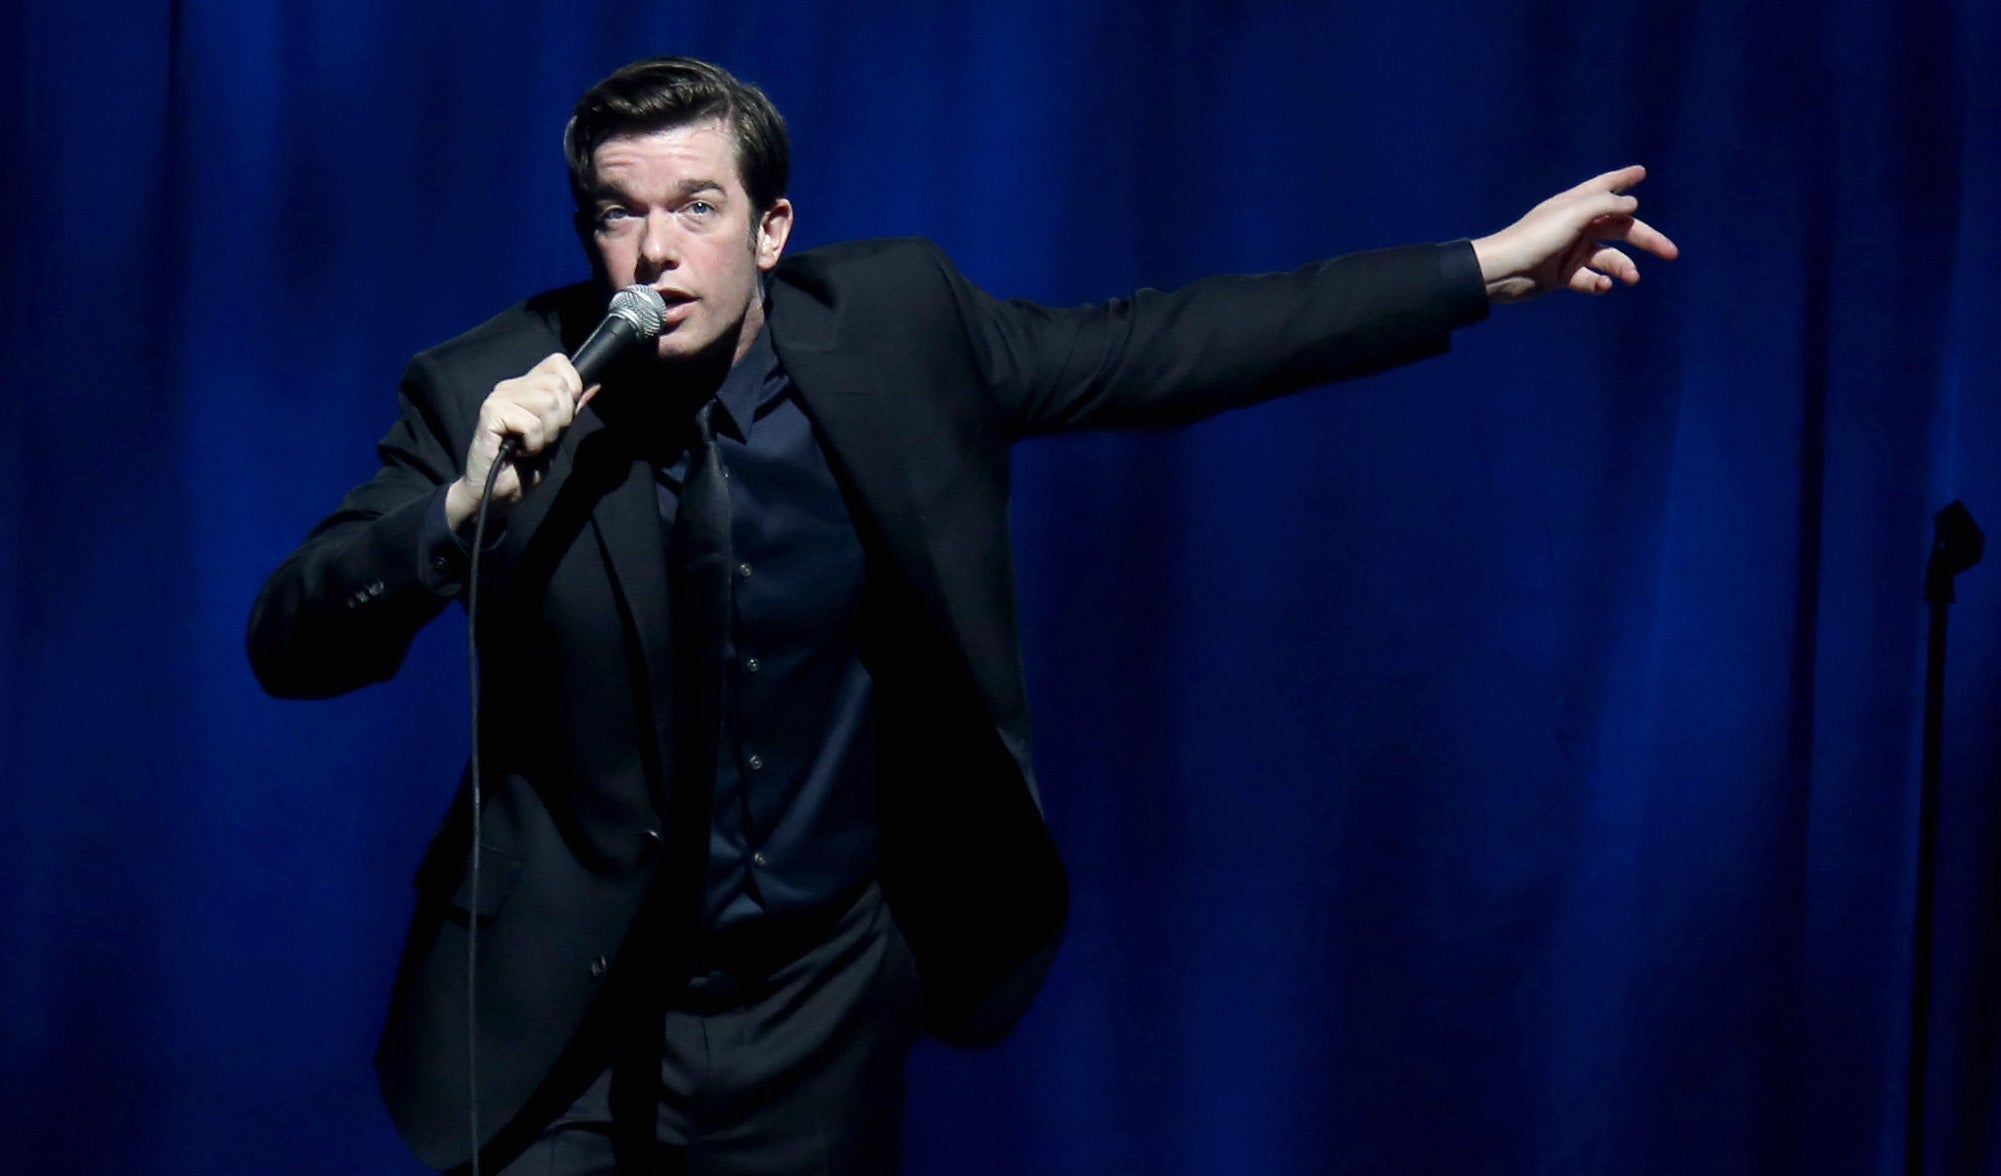 John Mulaney gesticulates while performing comedy.